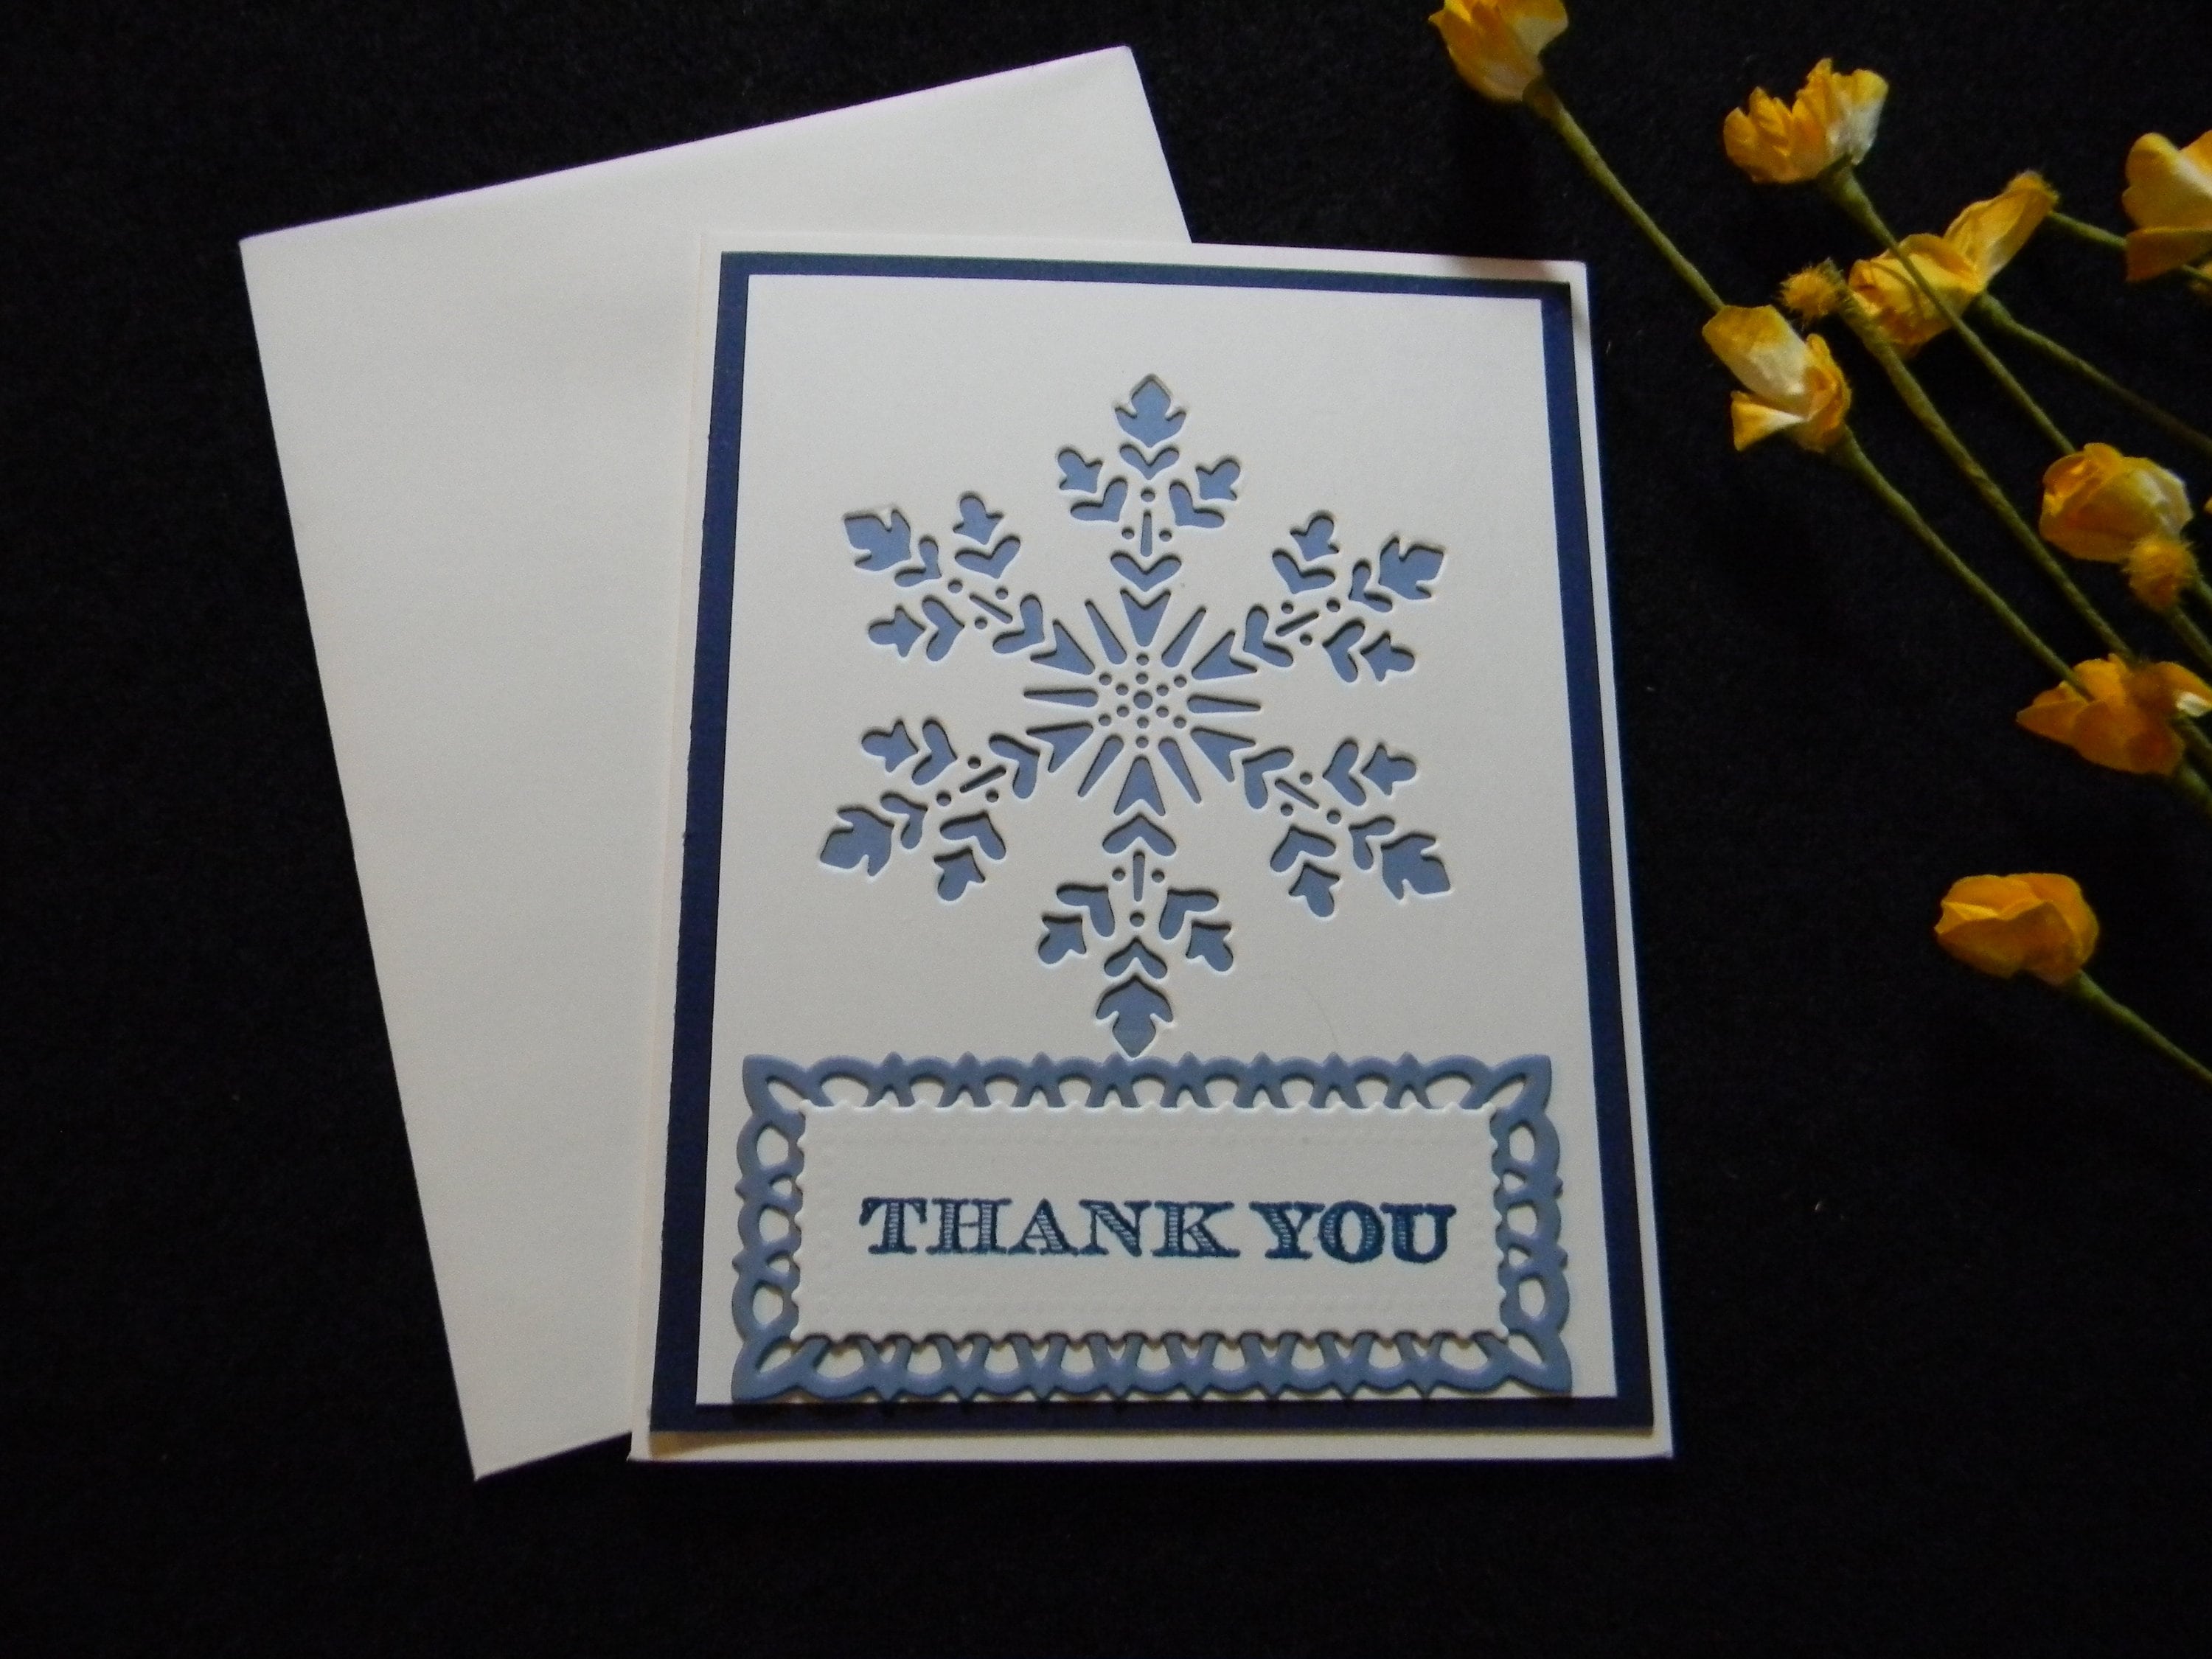 6 Snowflake Embossed Card Fronts Toppers A2 Size Card Stock White